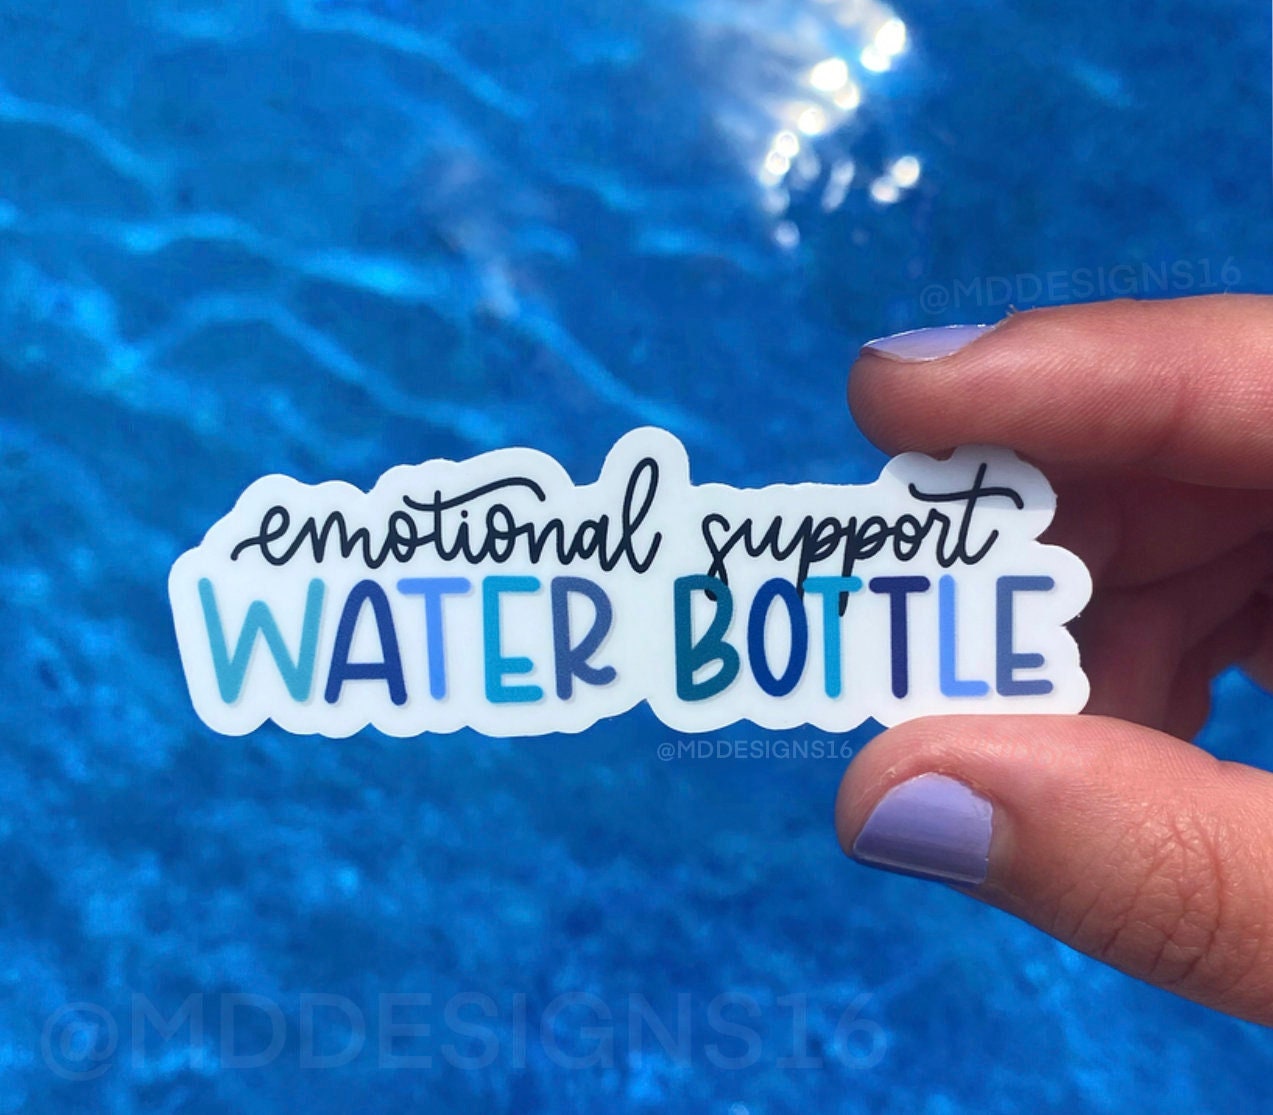 This Car Cup Holder Lets Ya Keep Yr Emotional Support Drink Bottle